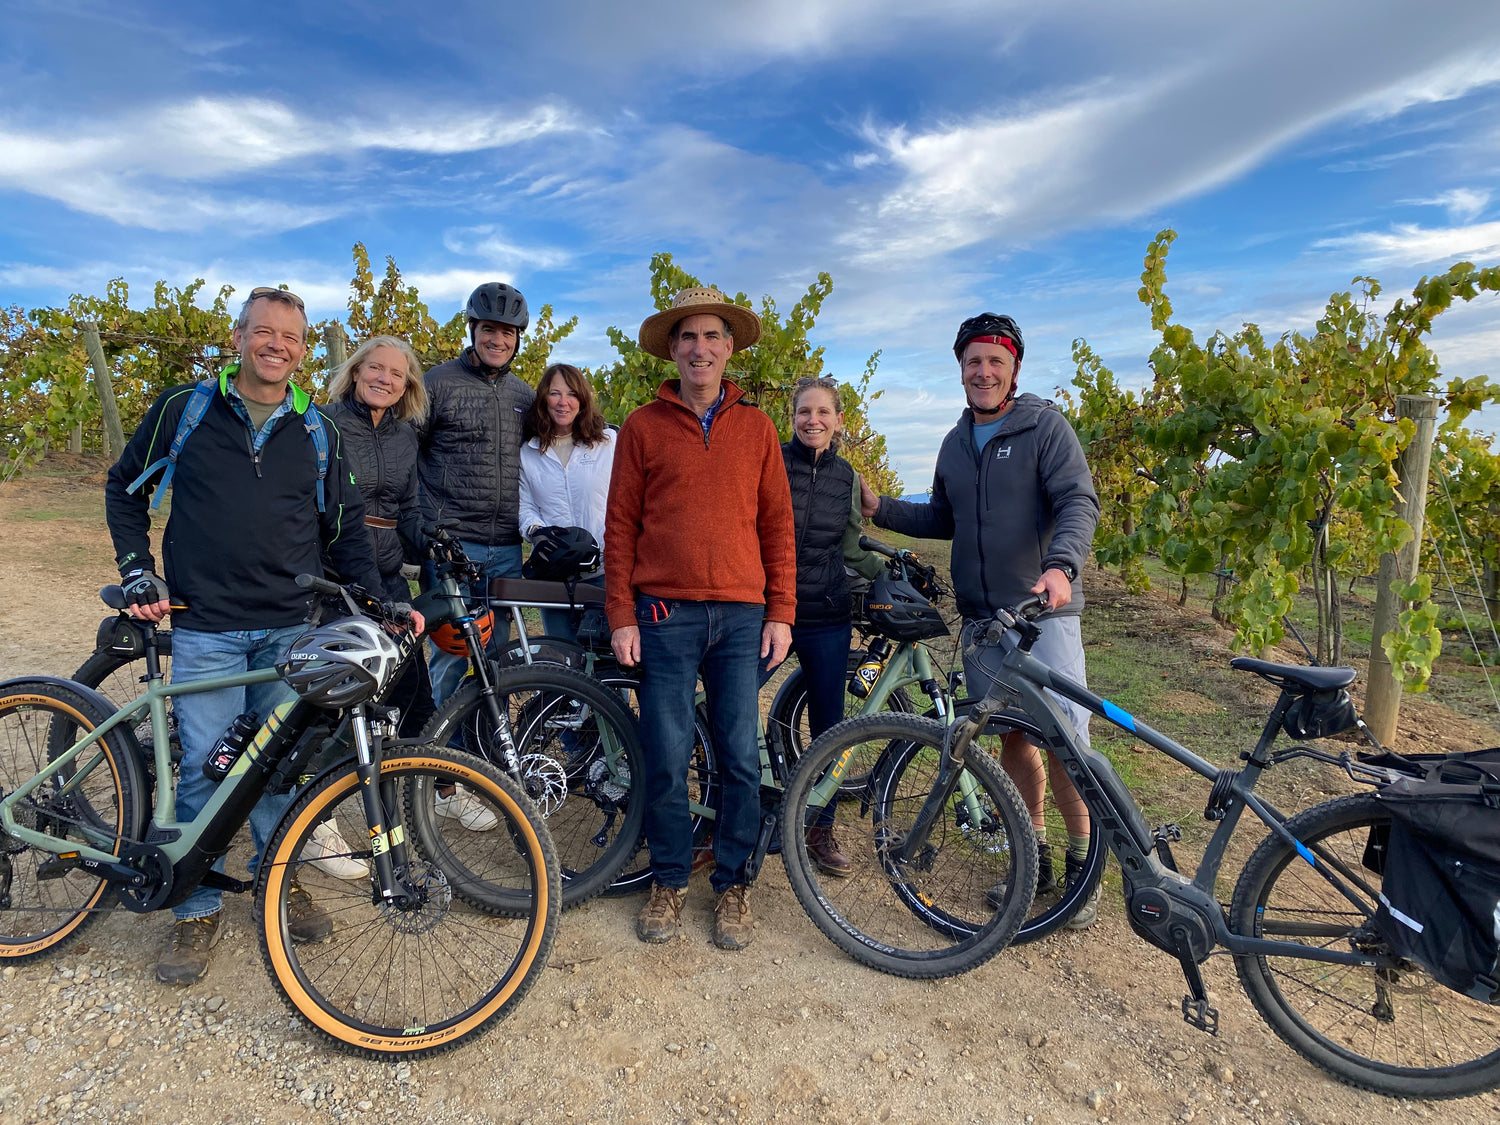 Group of people with bikes standing in a vineyard and smiling.